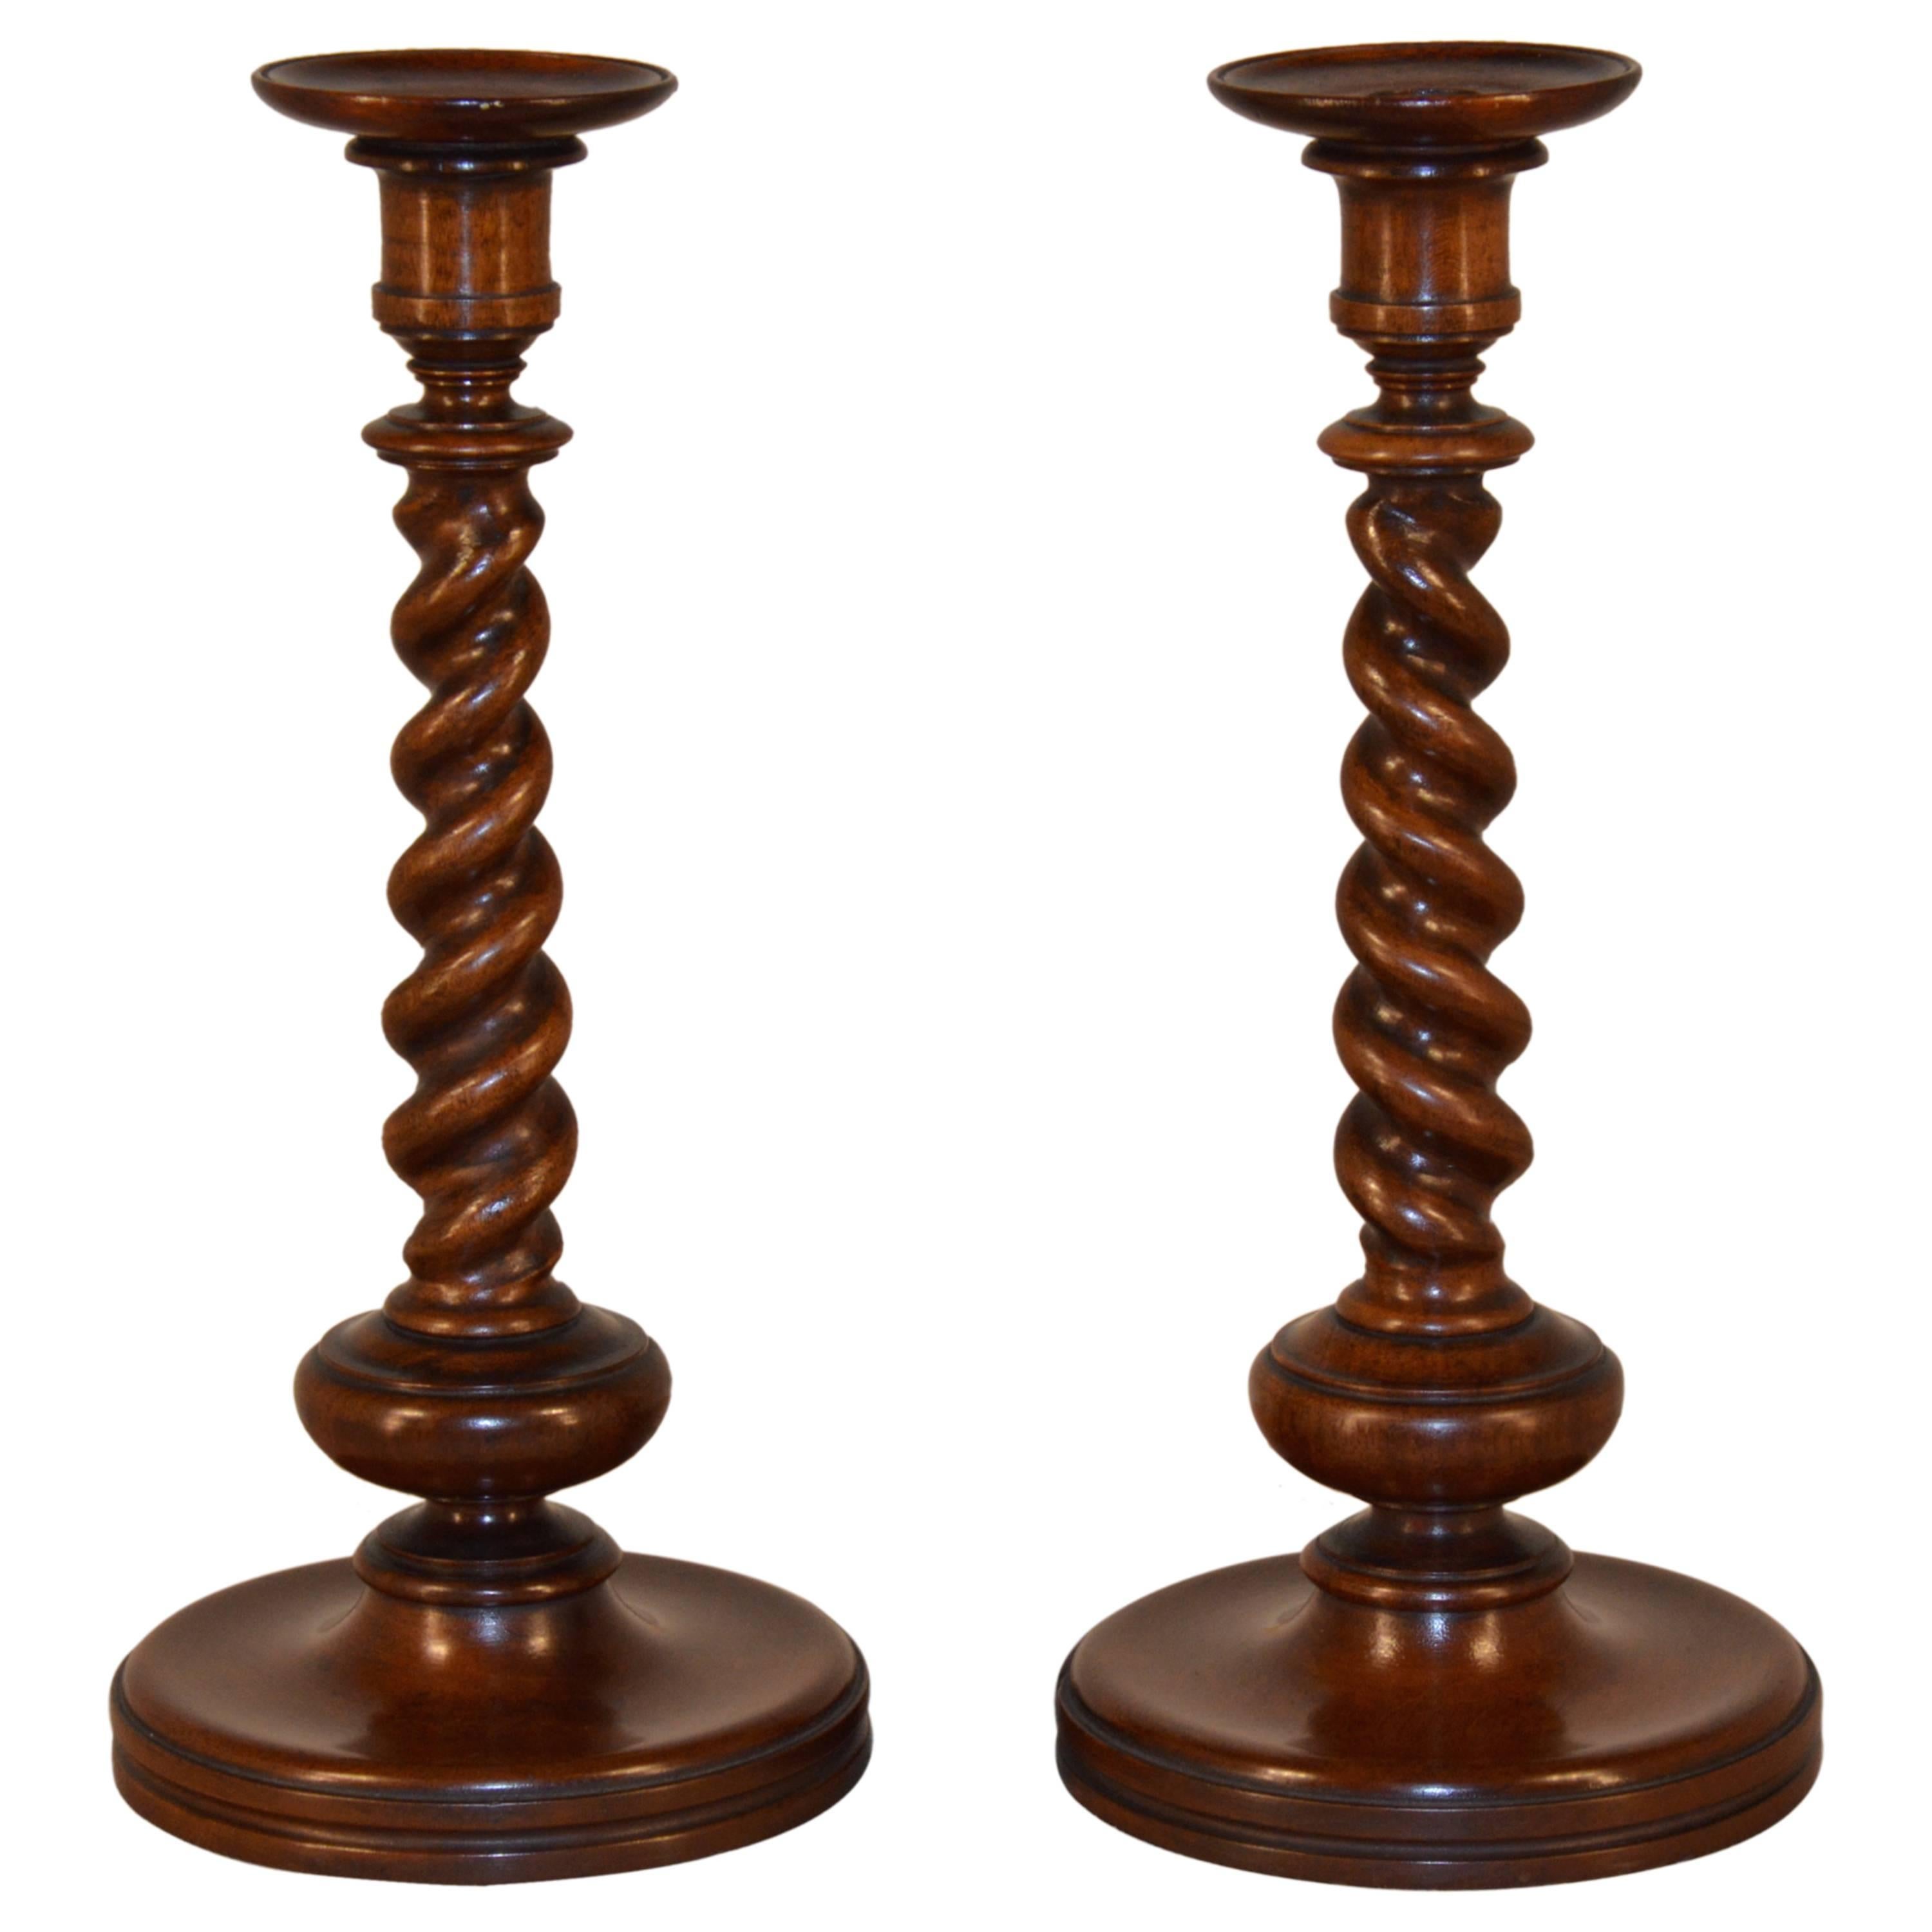 19th century pair of English candlesticks with hand-turned candle cups and barley twist columns, supported on turned bases.